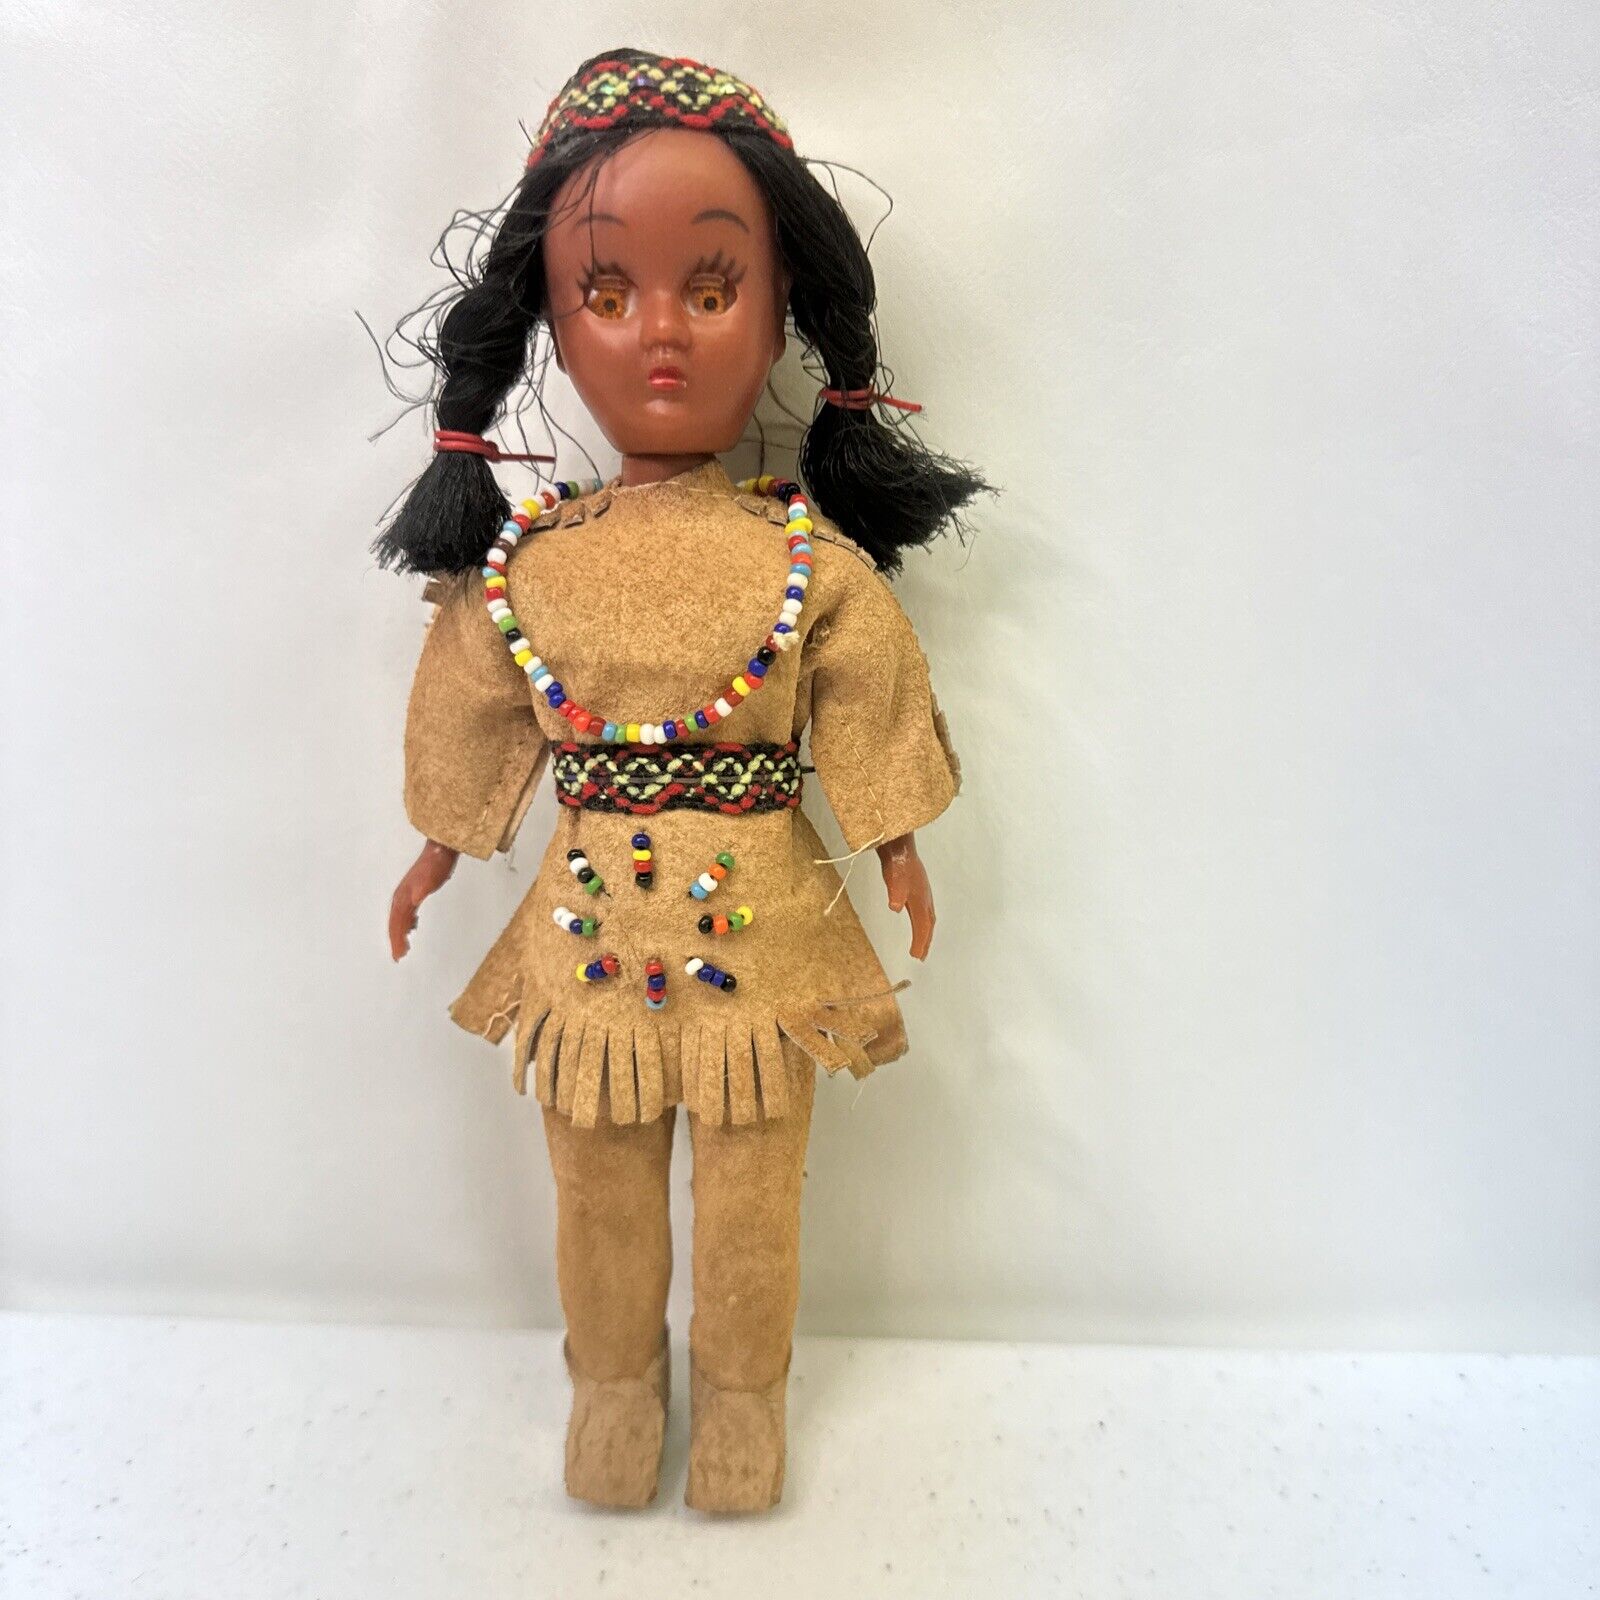 Vintage 60s Native American Indian Woman Doll 7.5